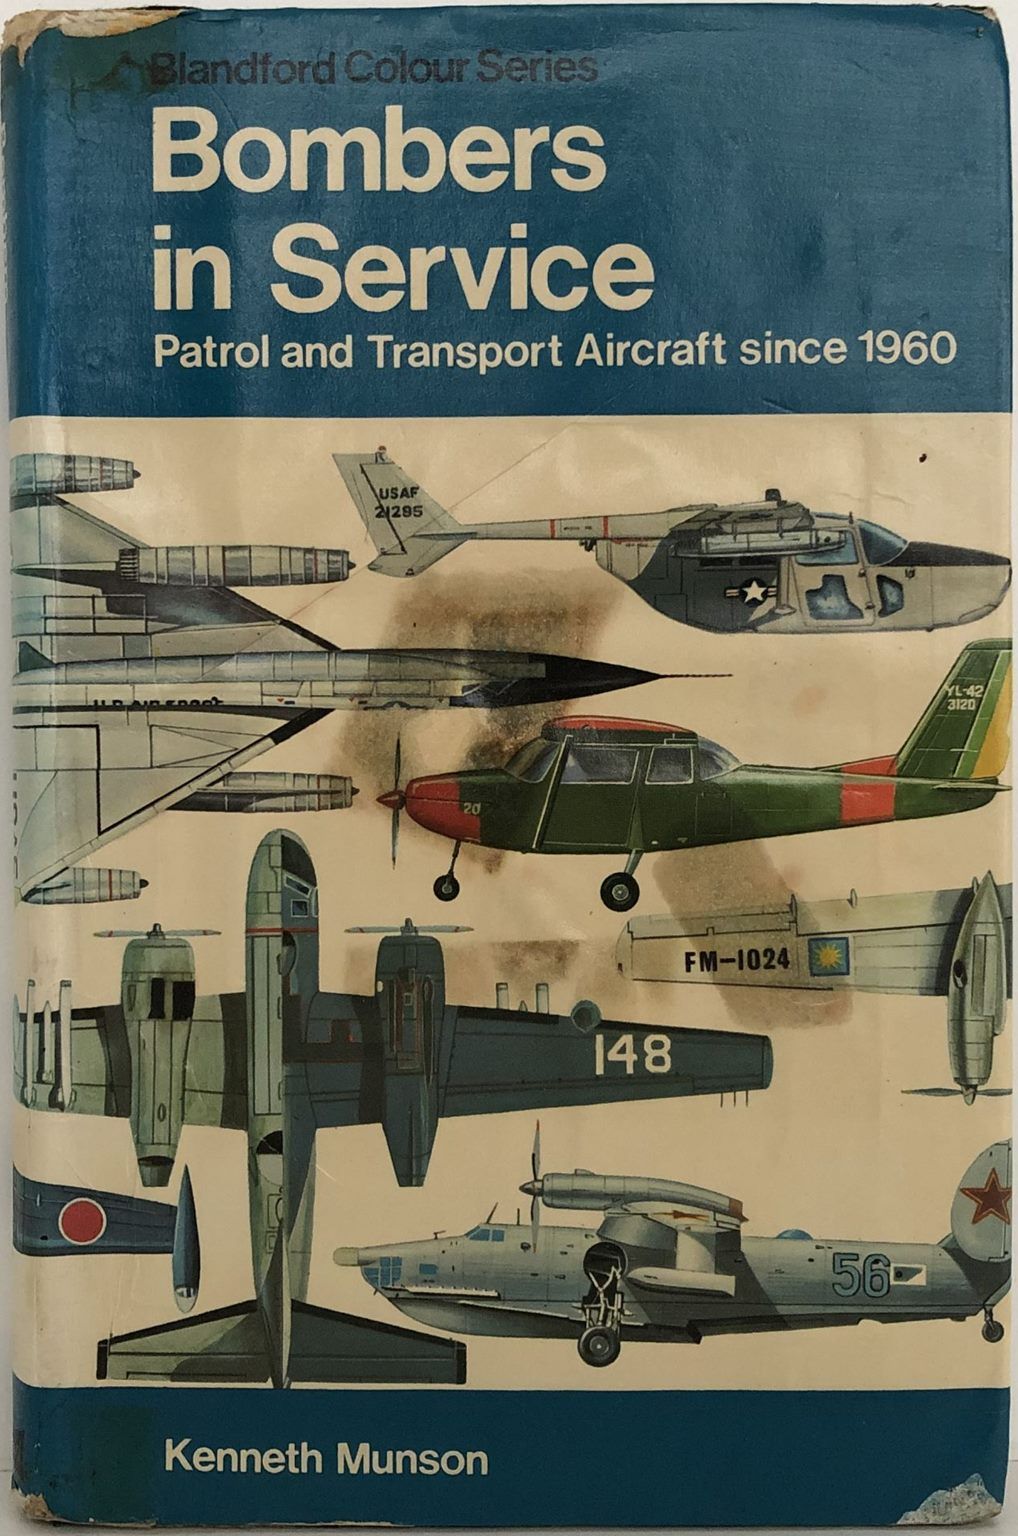 BOMBERS IN SERVICE: Patrol and Transport Aircraft since 1960